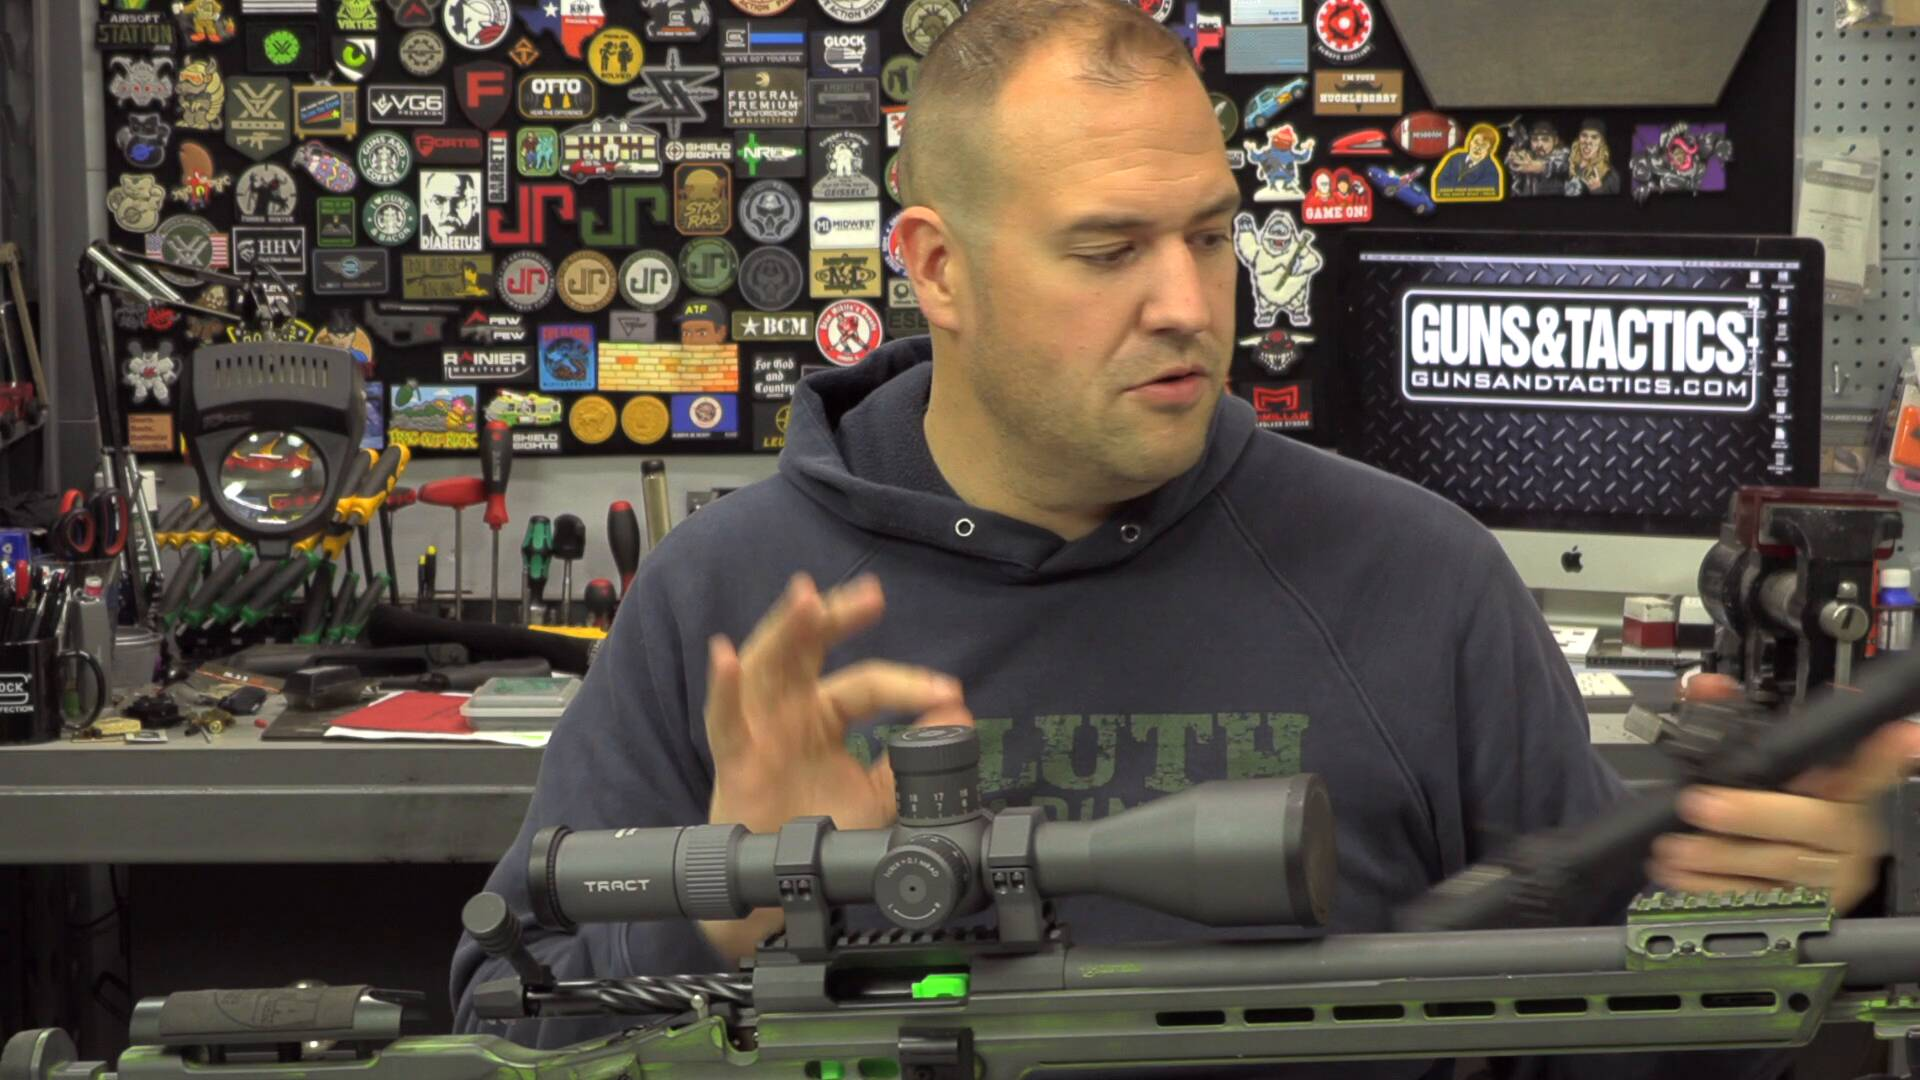 Guns and Tactics' David Timm Reviews the TRACT TORIC 34mm 4.5-30X56 Extreme Long Range Rifle Scope